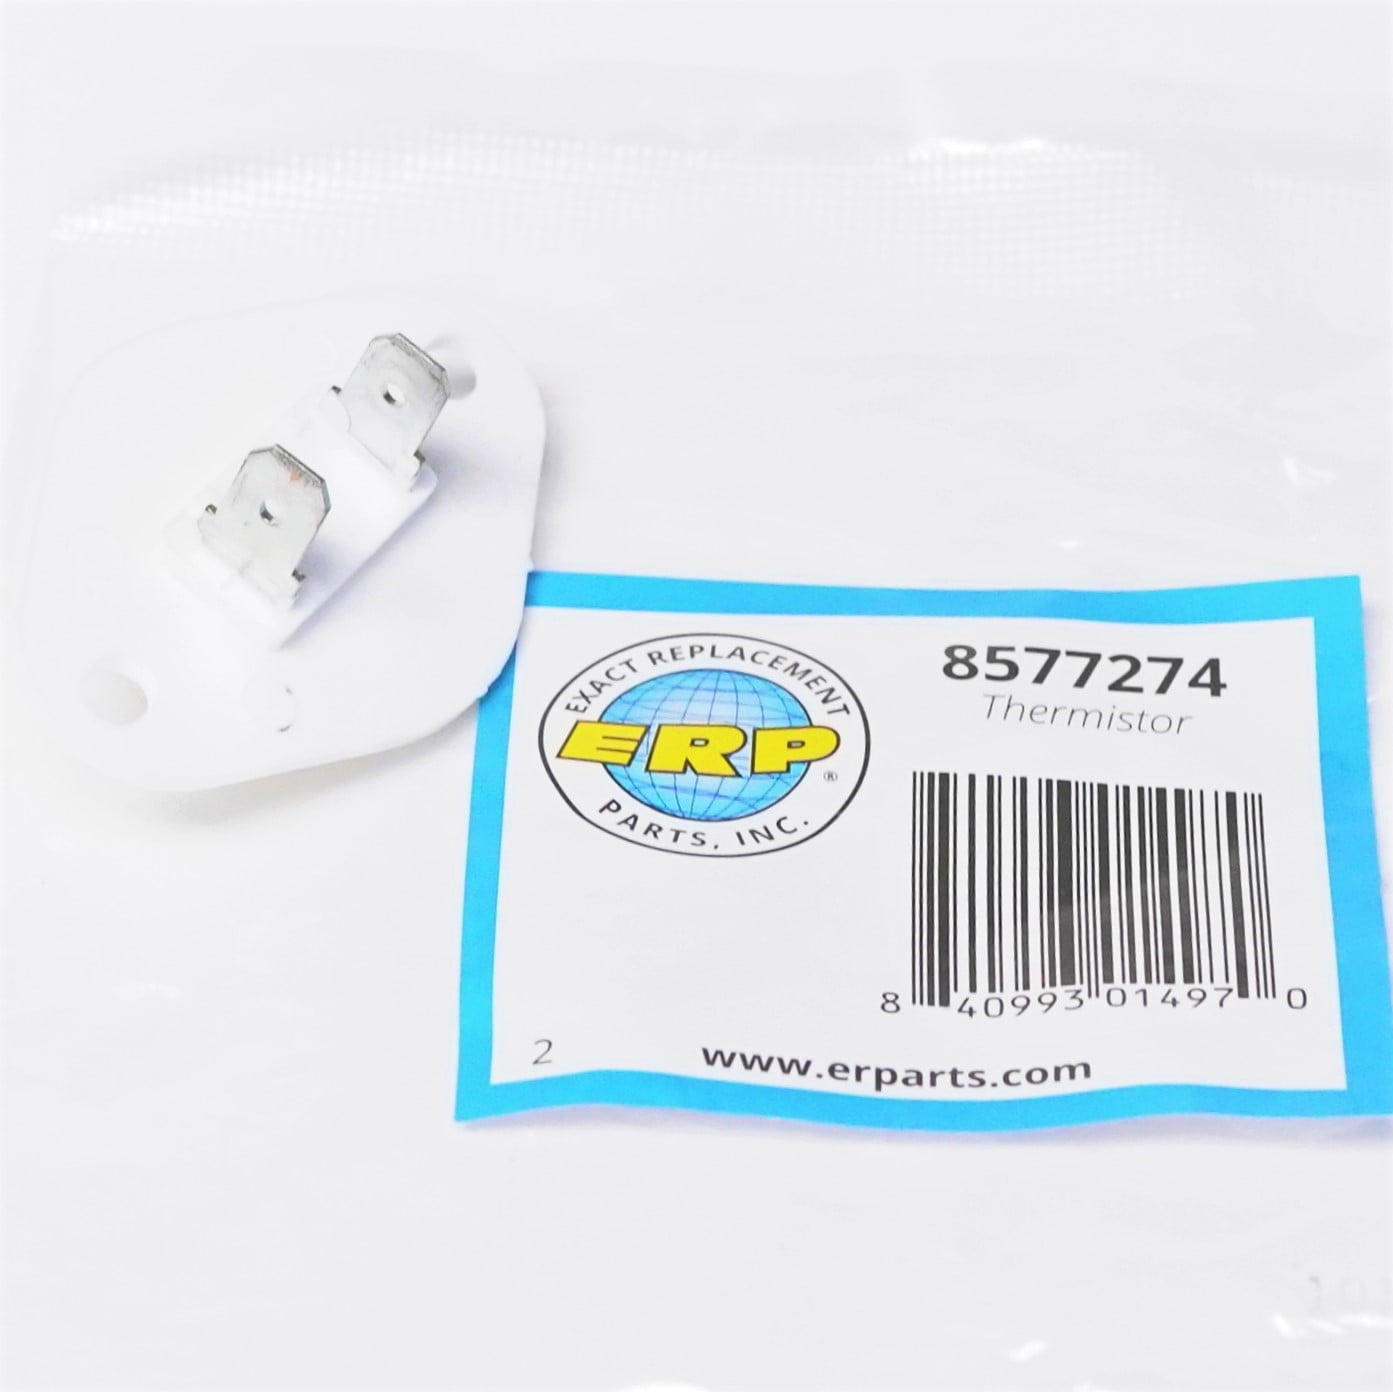 AP6013514 Dryer Thermistor Compatible With Whirlpool Dryers 